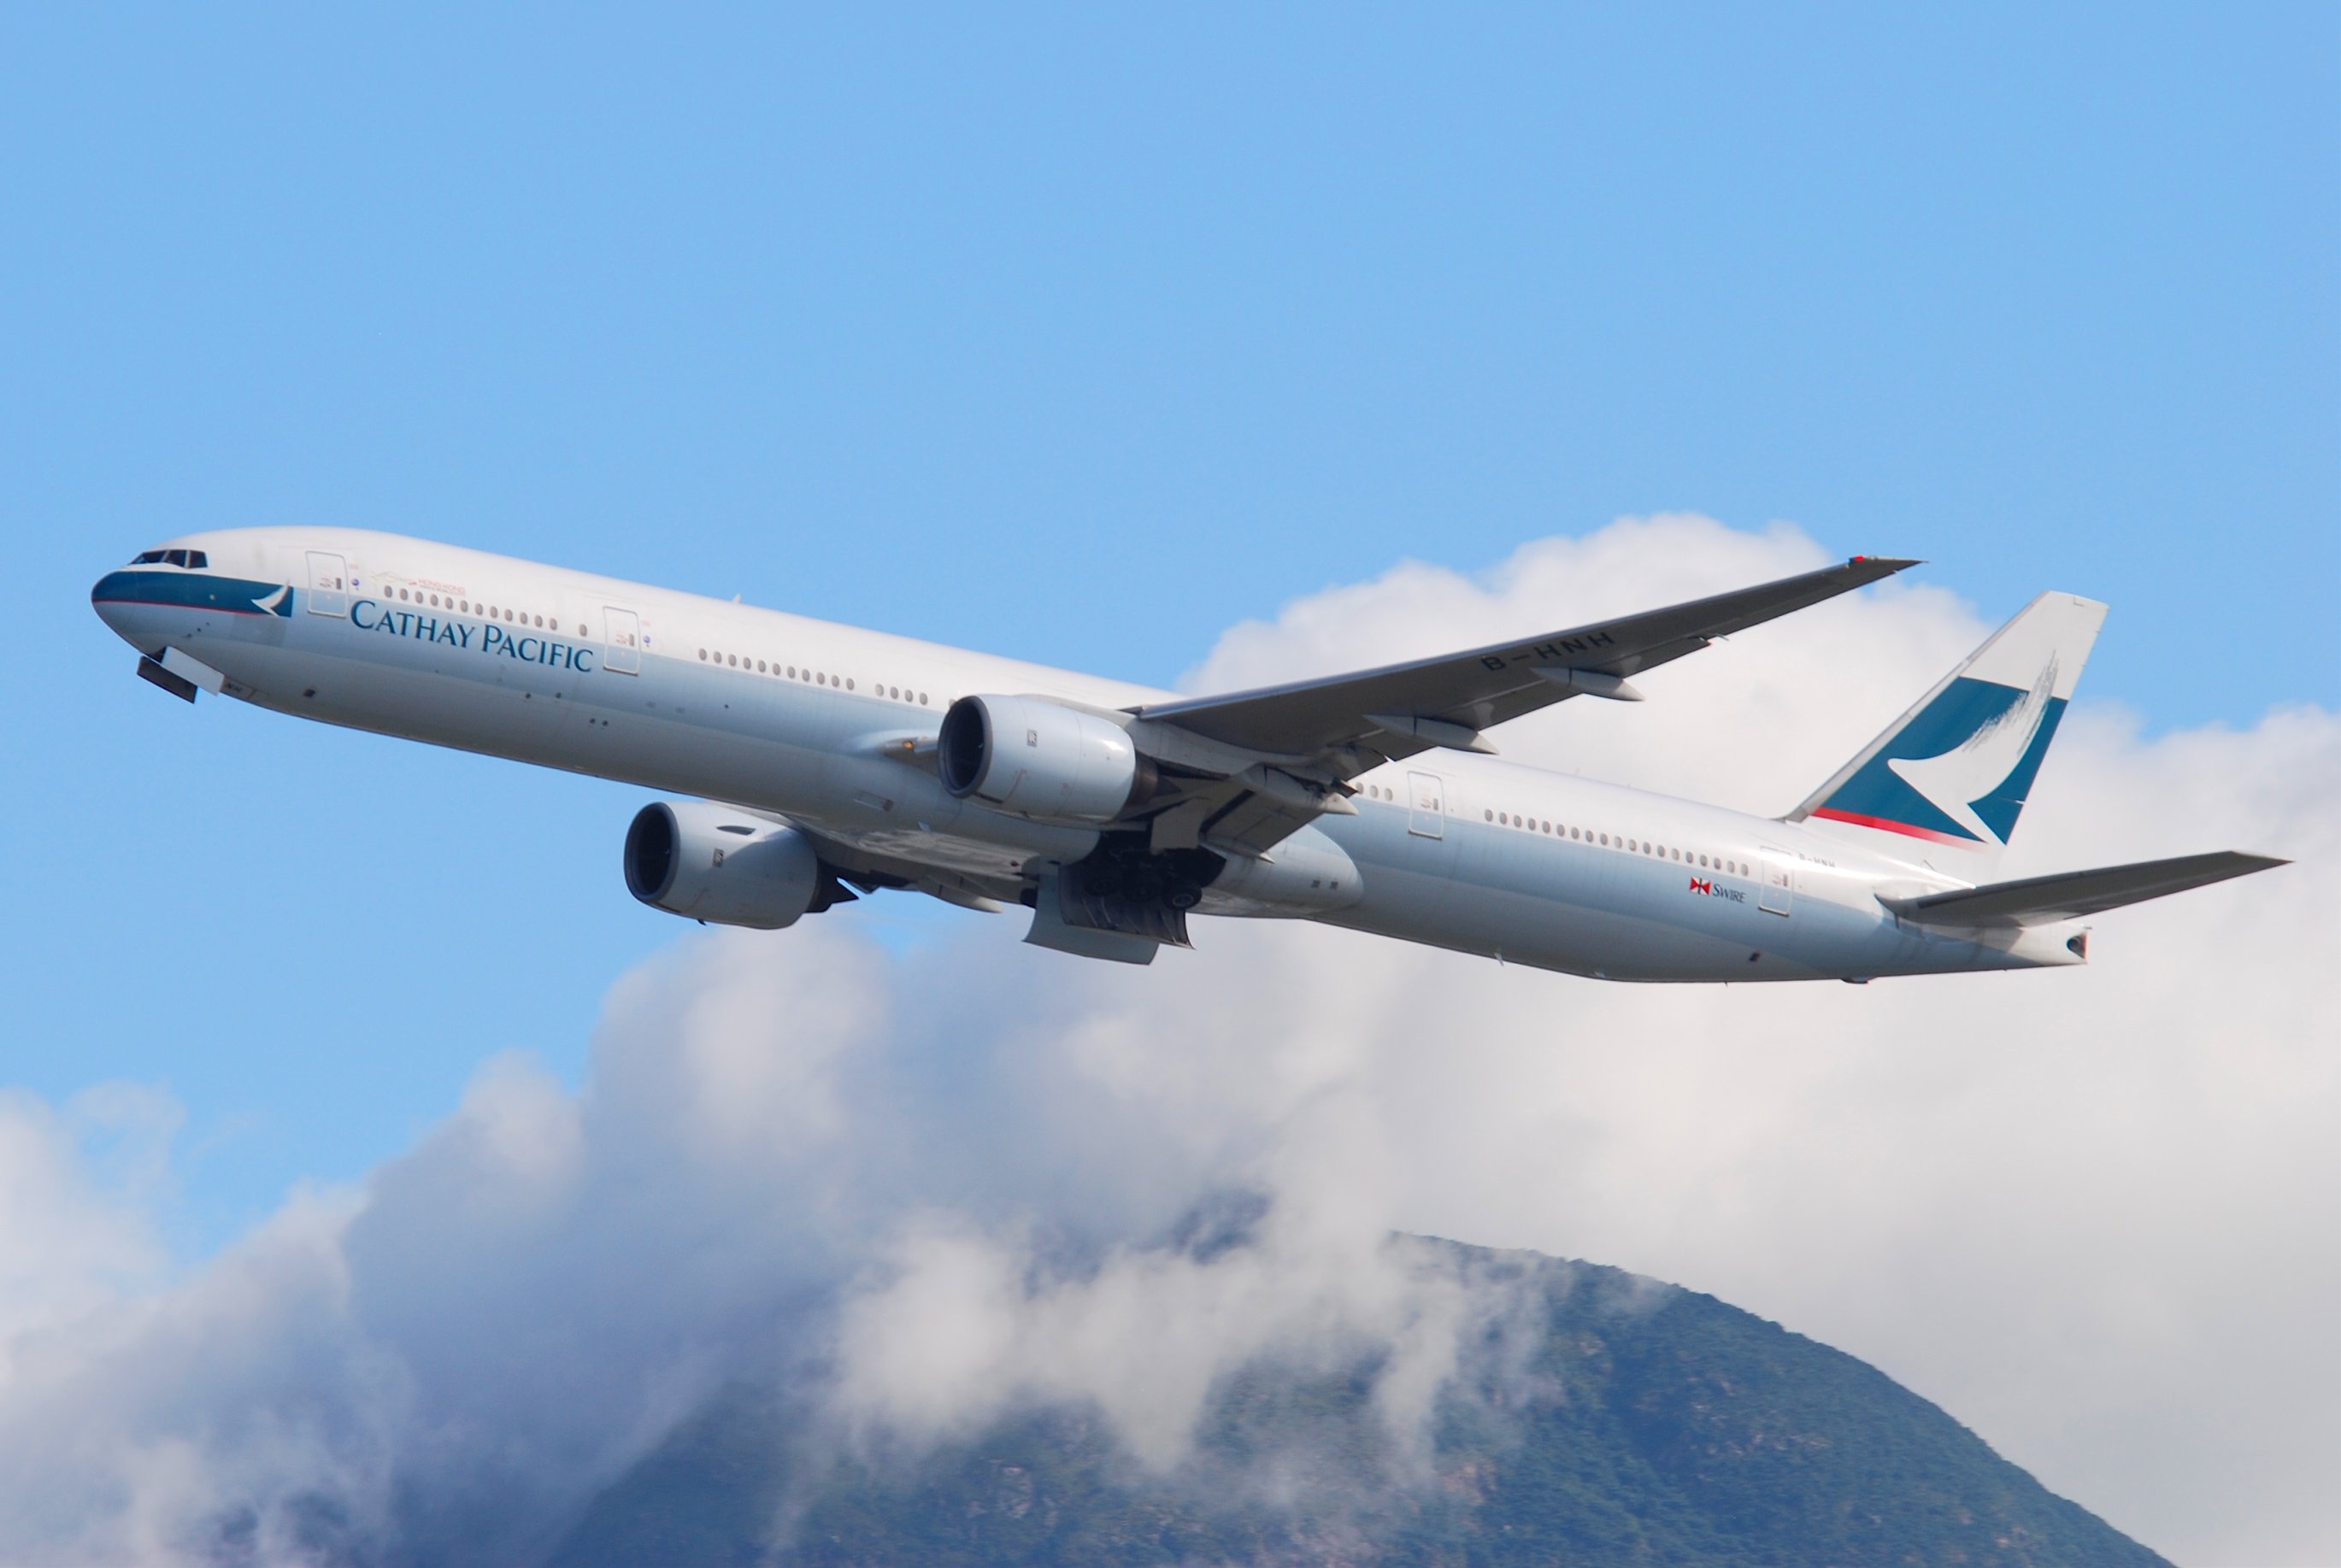 File:Cathay Pacific Boeing 777-300; B-HNH@HKG;31.07.2011 614tz (6053499684).jpg - Wikimedia Commons